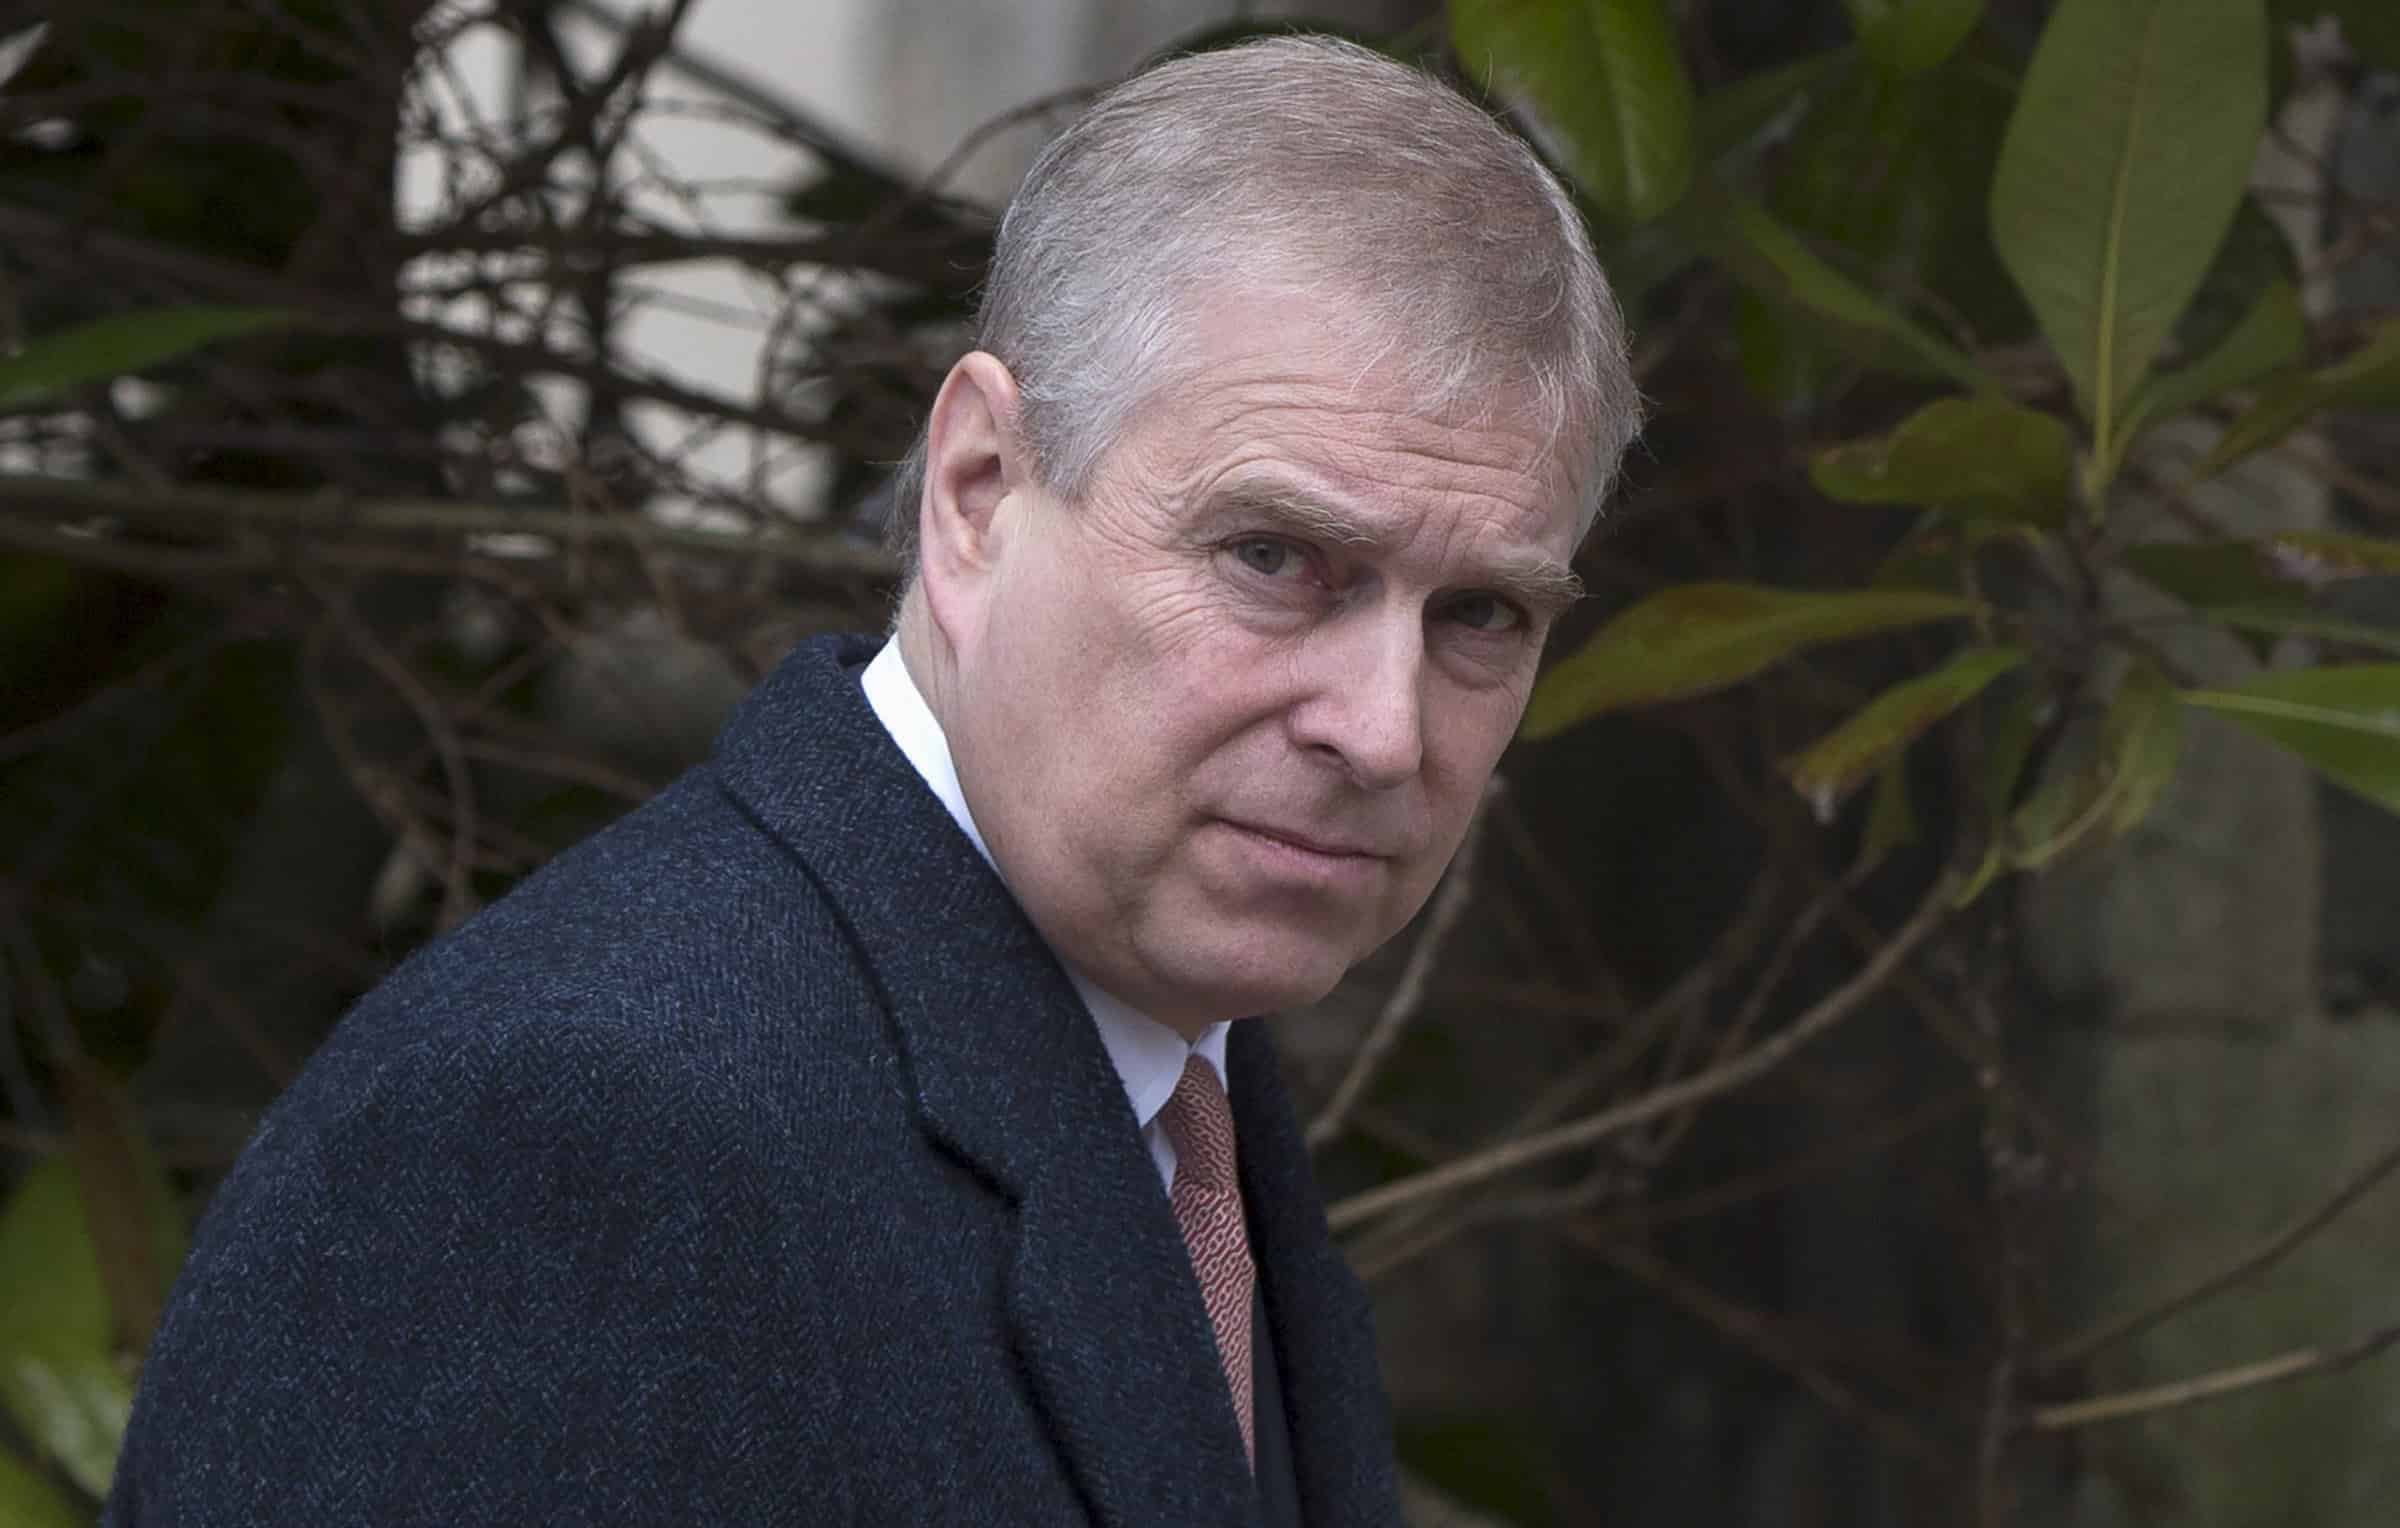 Met Police taking no further action after reviewing Prince Andrew accuser claims